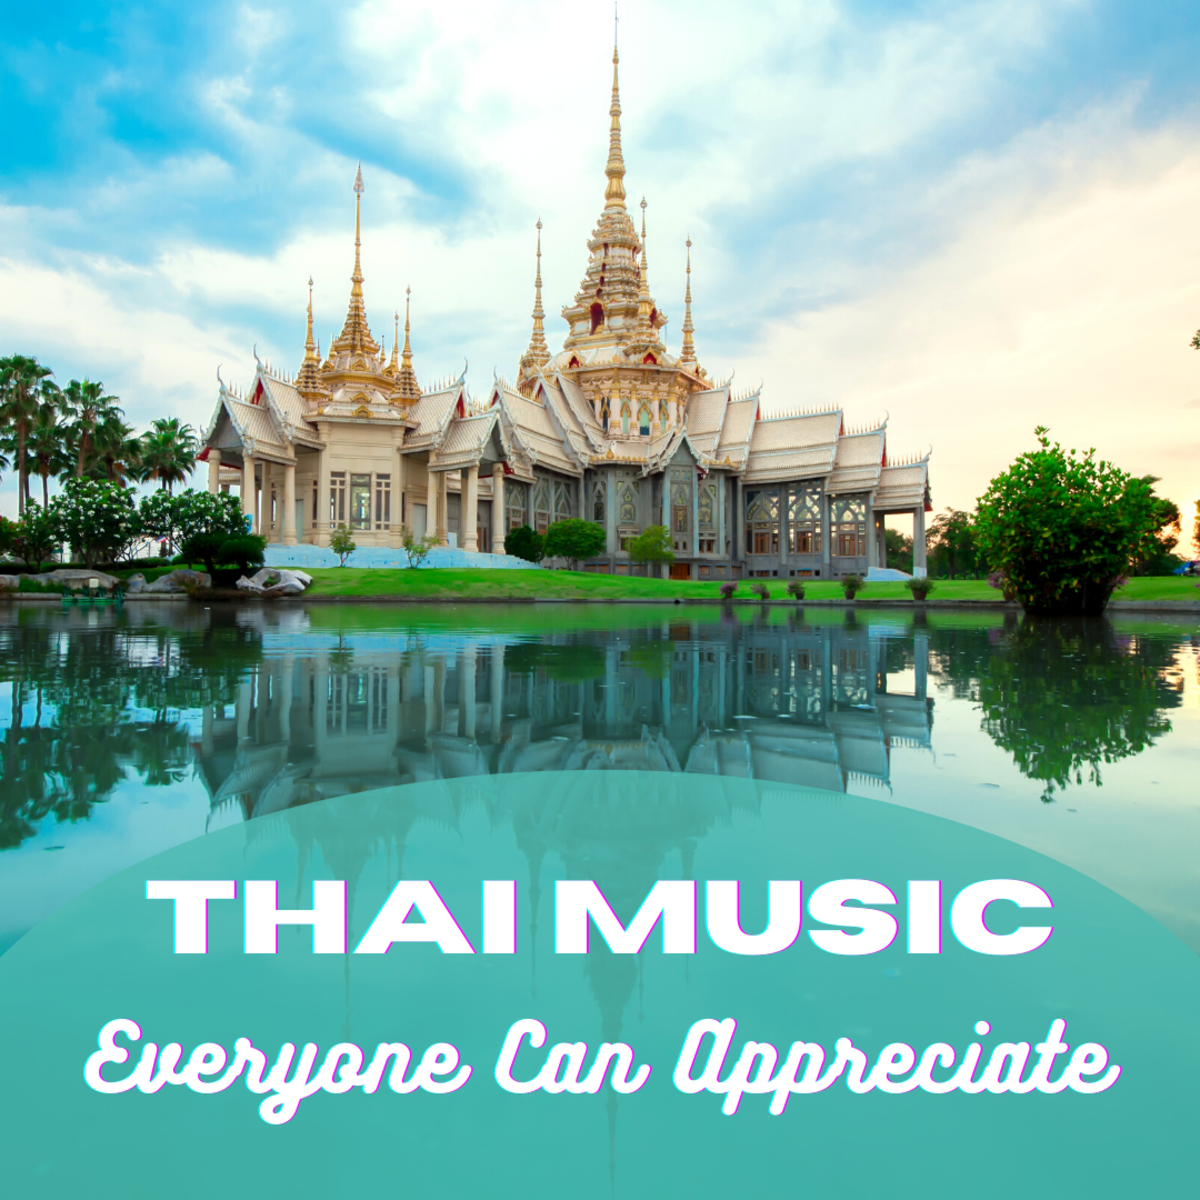 Thai music isn't super popular overseas, but there is some Thai music that everyone can appreciate!